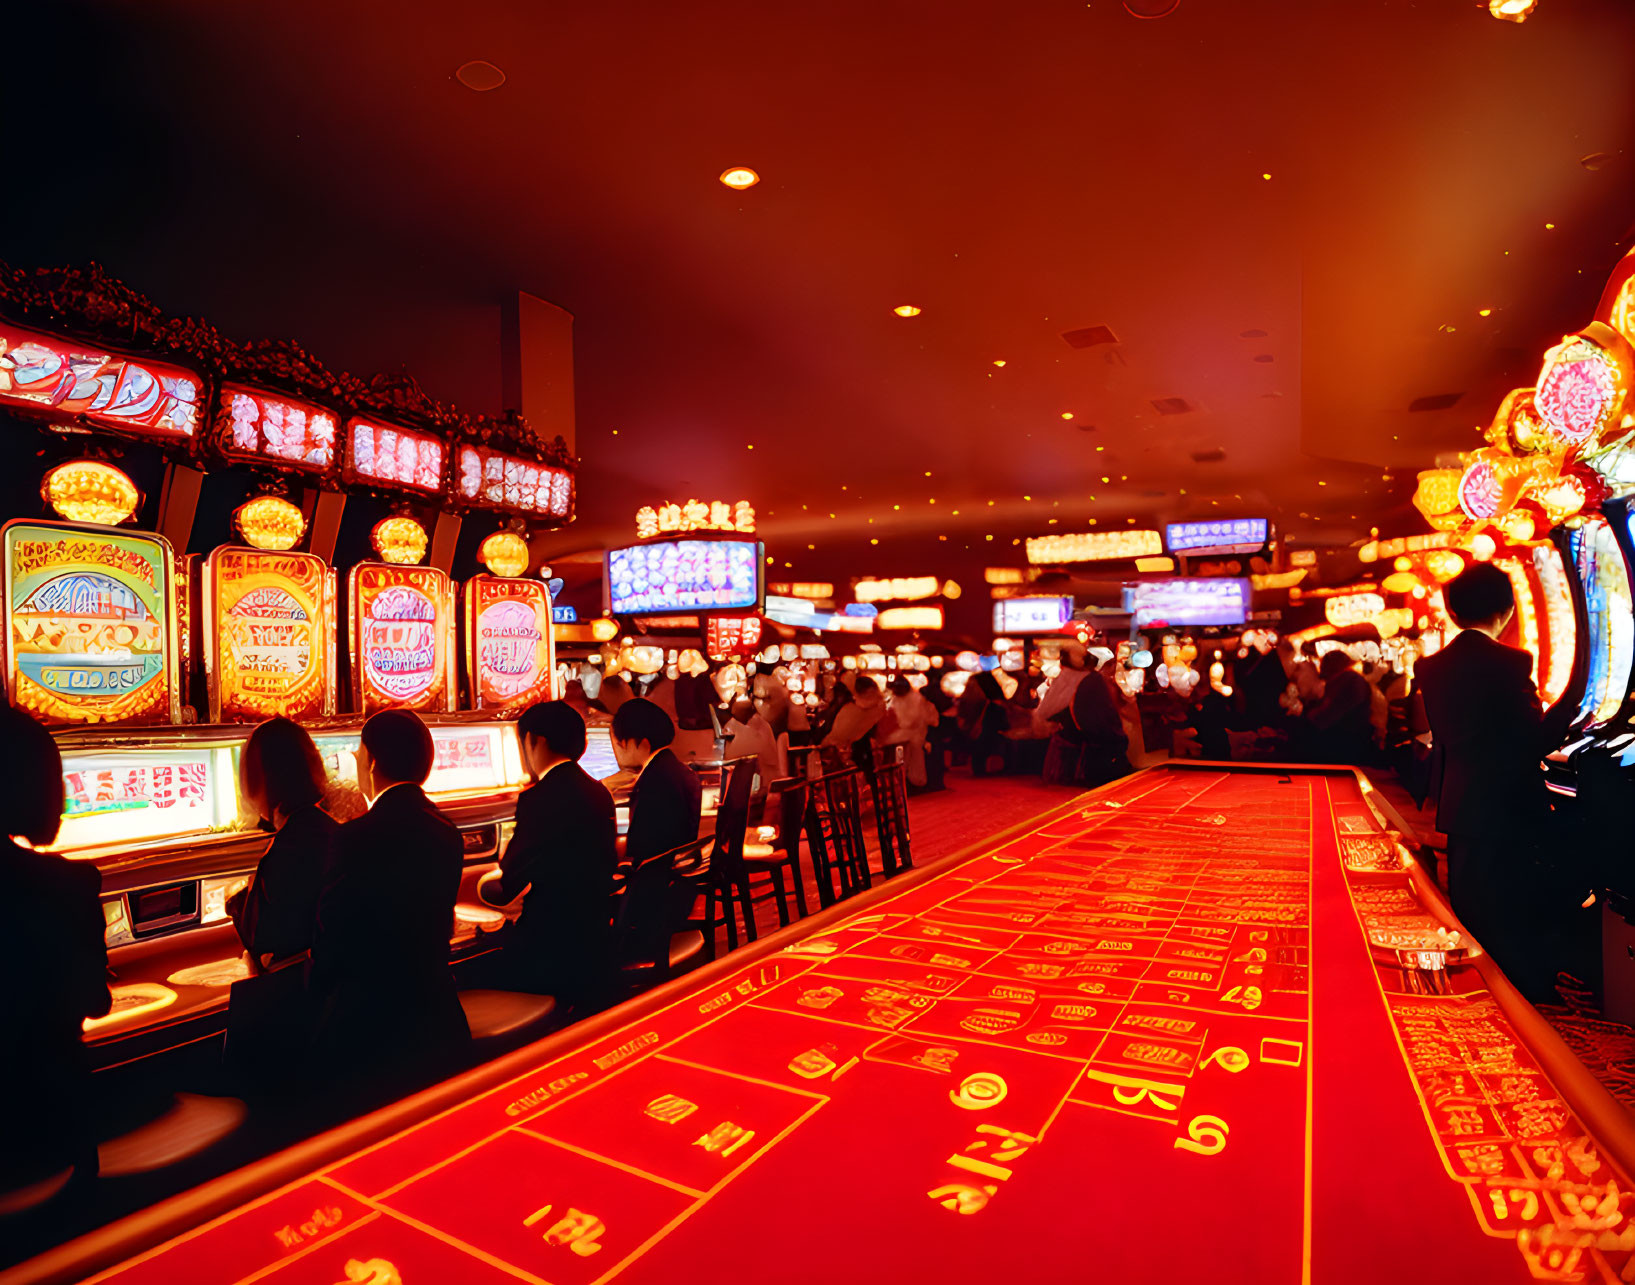 Colorful Casino Floor with Slot Machines and Gamblers at Red Tables